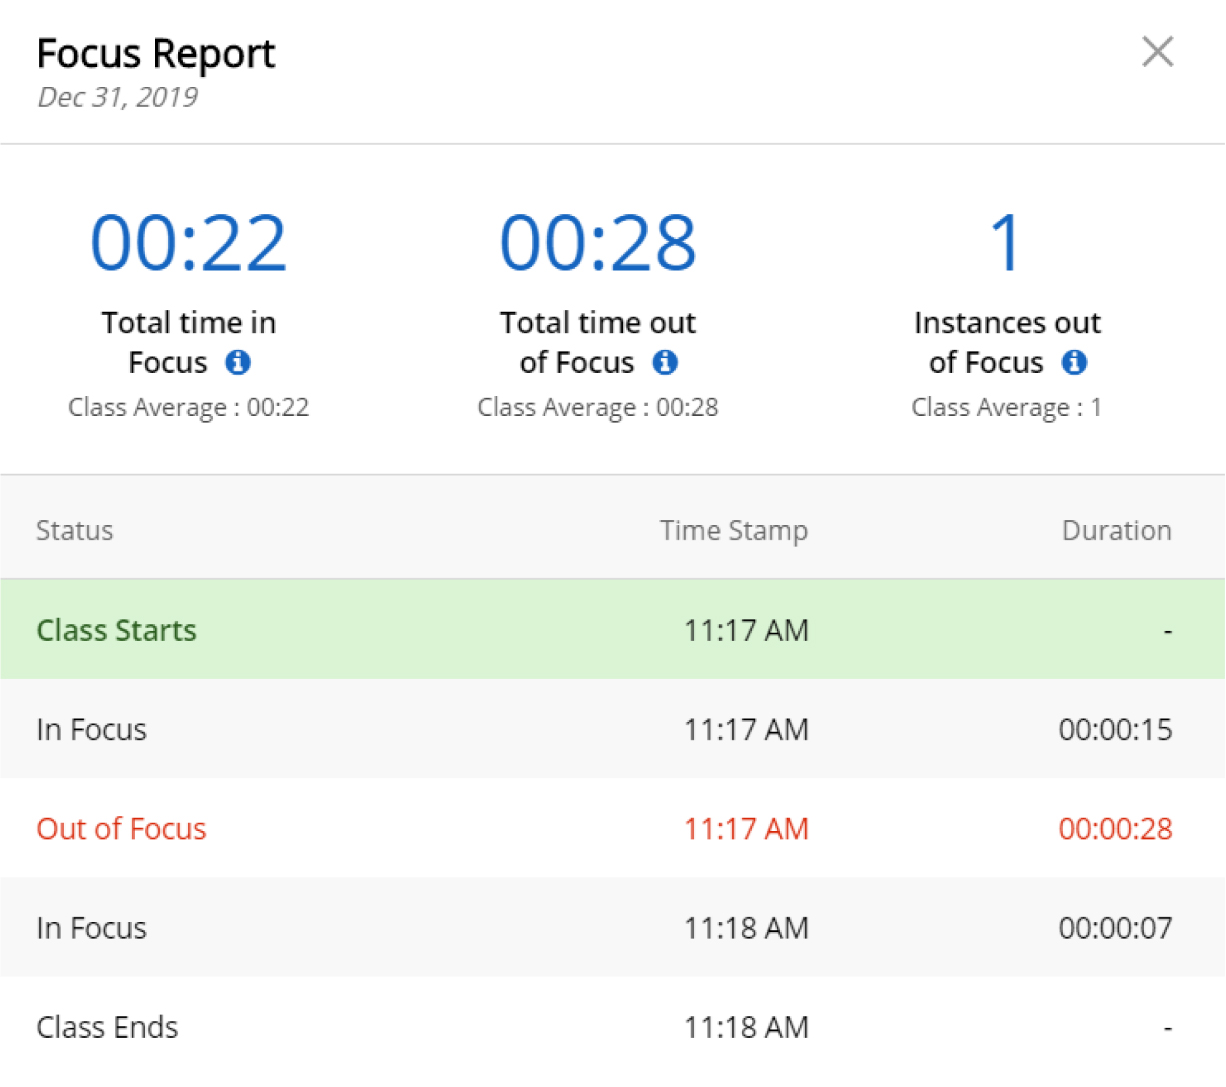 An image of a student's Focus Report shows: Total time in Focus, total time out of Focus, and # Instances out of Focus, followed by a table of timestamps throughout class illustrating the information stated above.